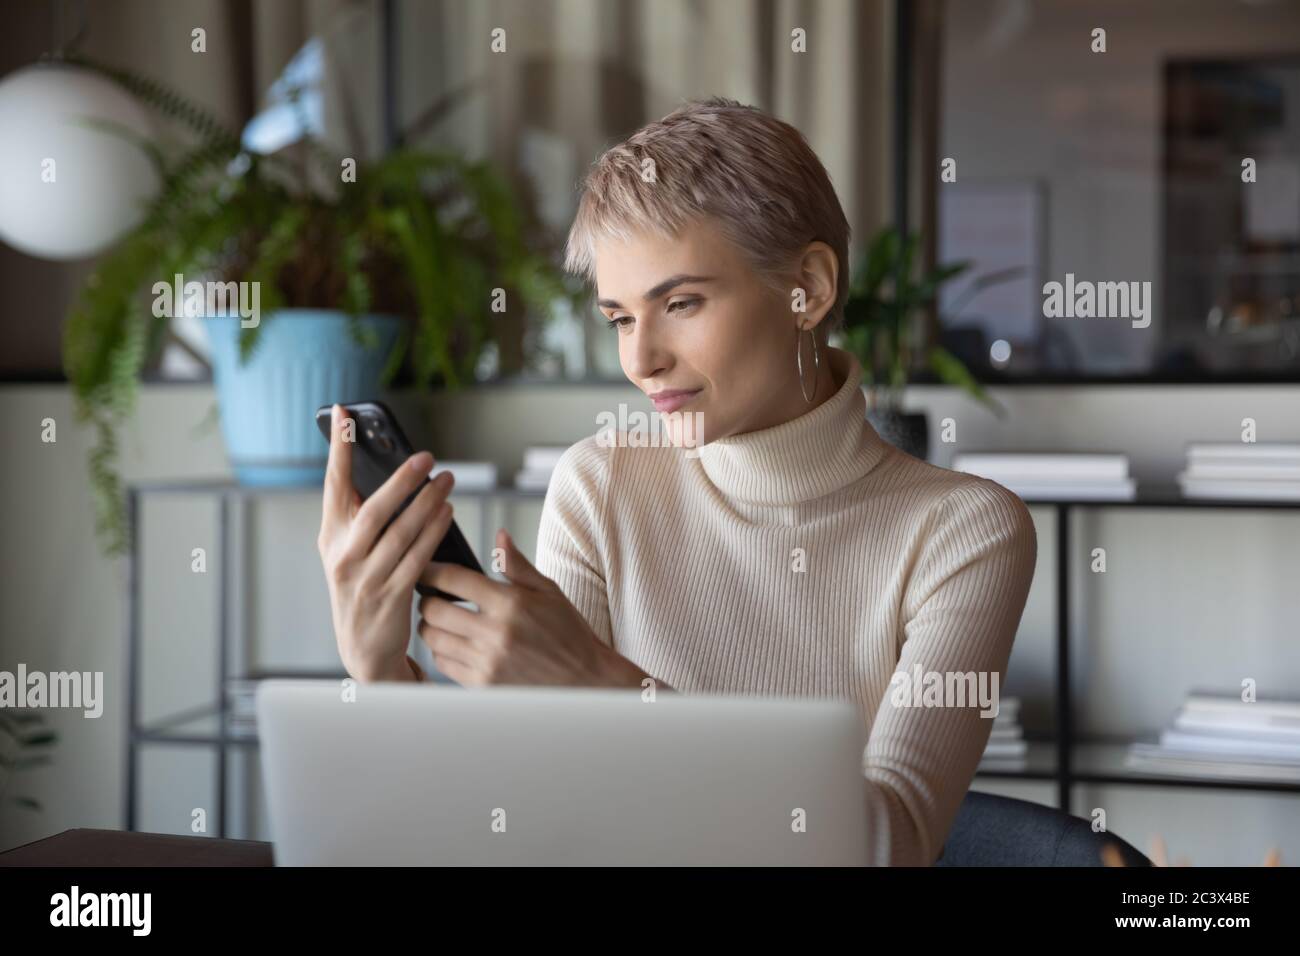 Businesswoman holding smartphone using agenda planning business meetings with clients Stock Photo